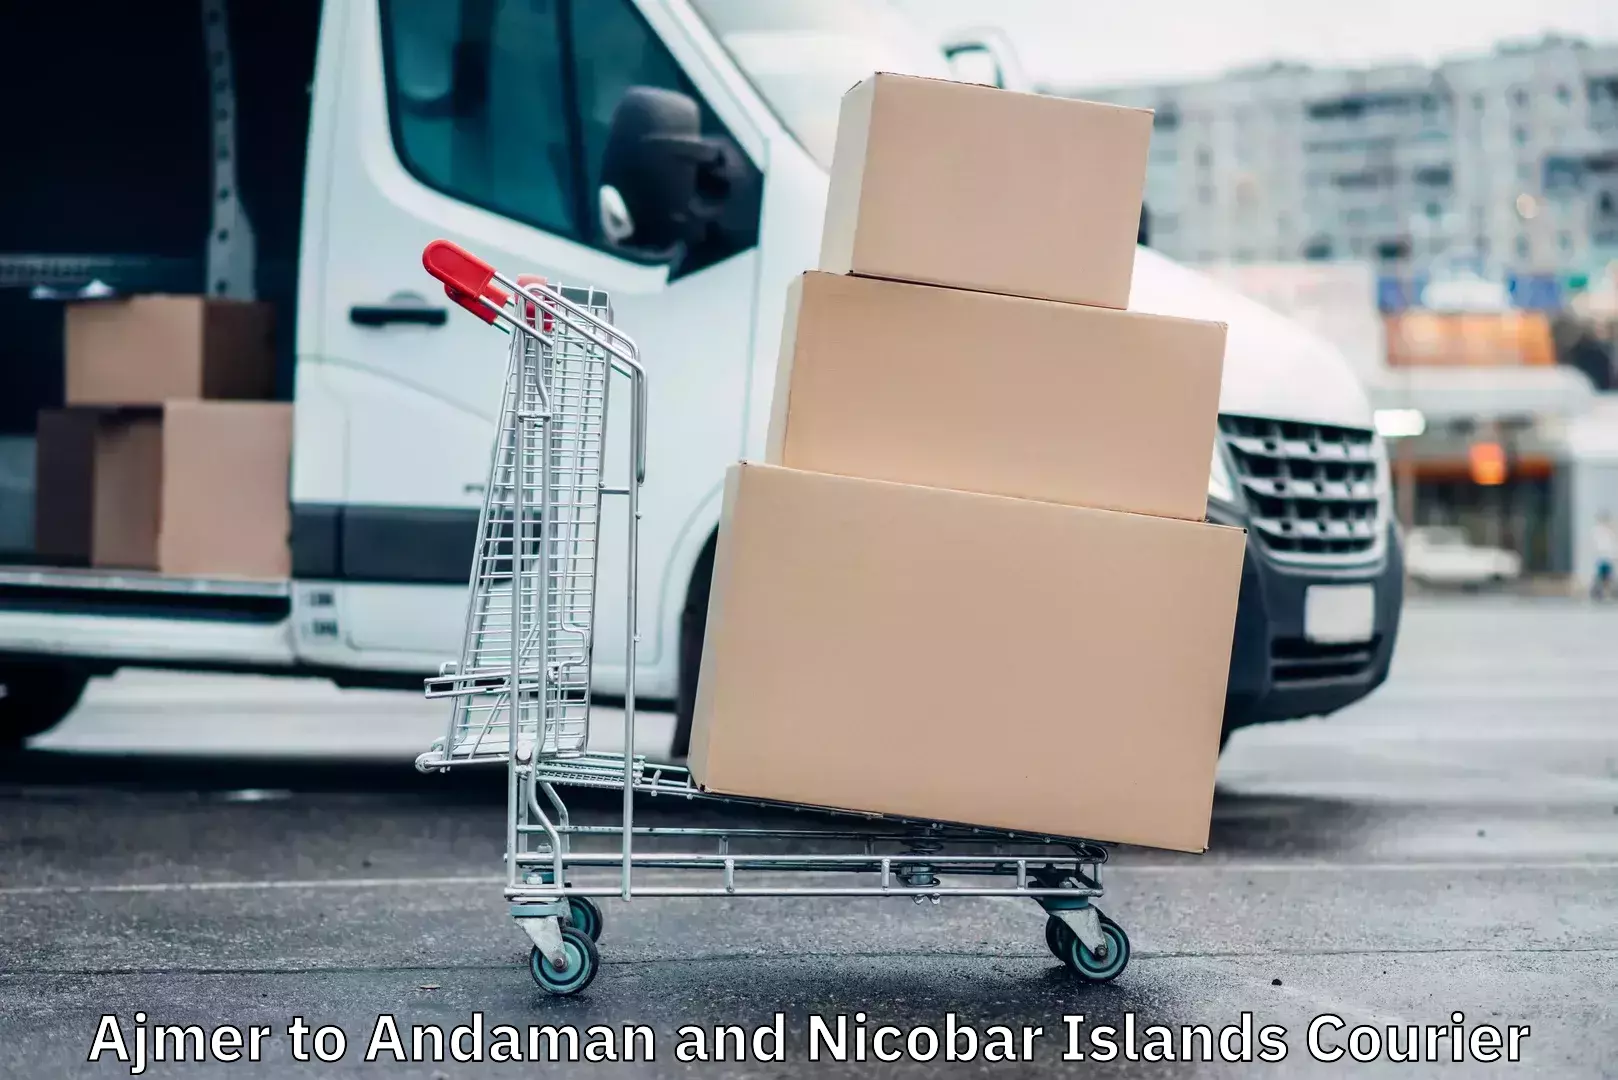 Parcel delivery automation Ajmer to Andaman and Nicobar Islands